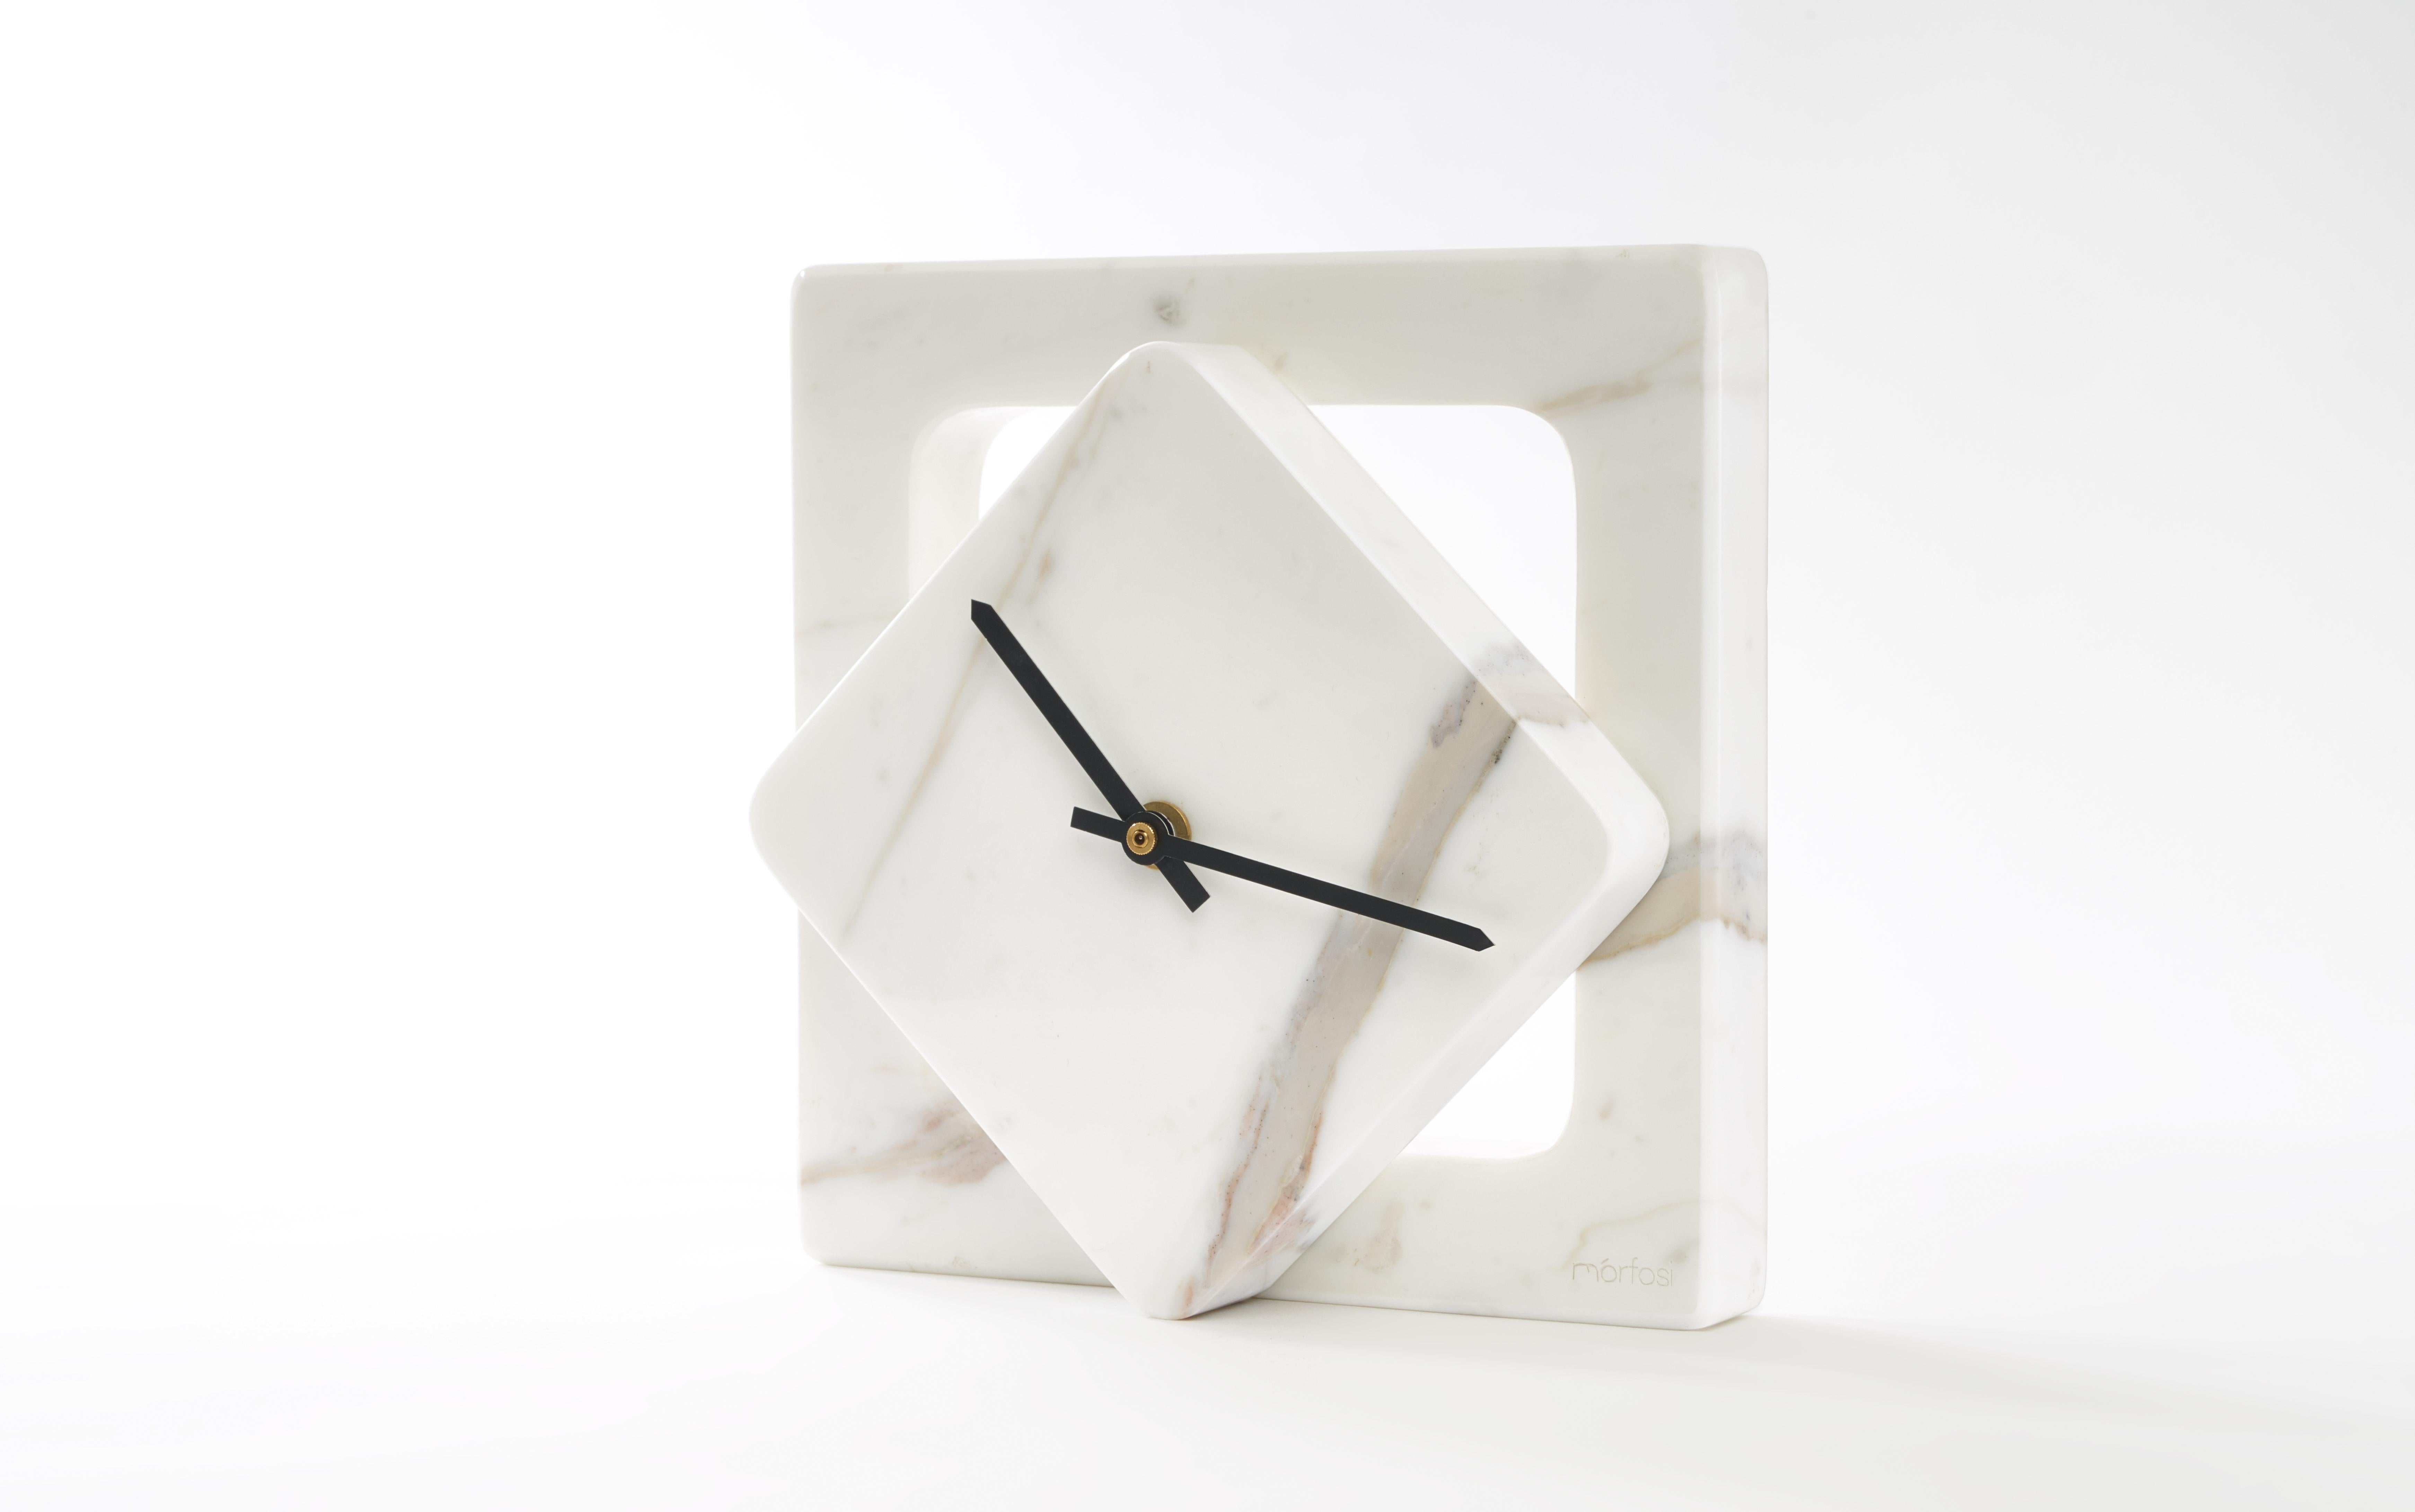 Marble One Cut table clock - Moreno Ratti
Dimensions: D 9 x W 20 x H 20 cm
Materials: Calcata Oro marble.

The idea of this collection comes from the desire to take the concept of minimalism to the extreme, as in the Recisi series: a single cut